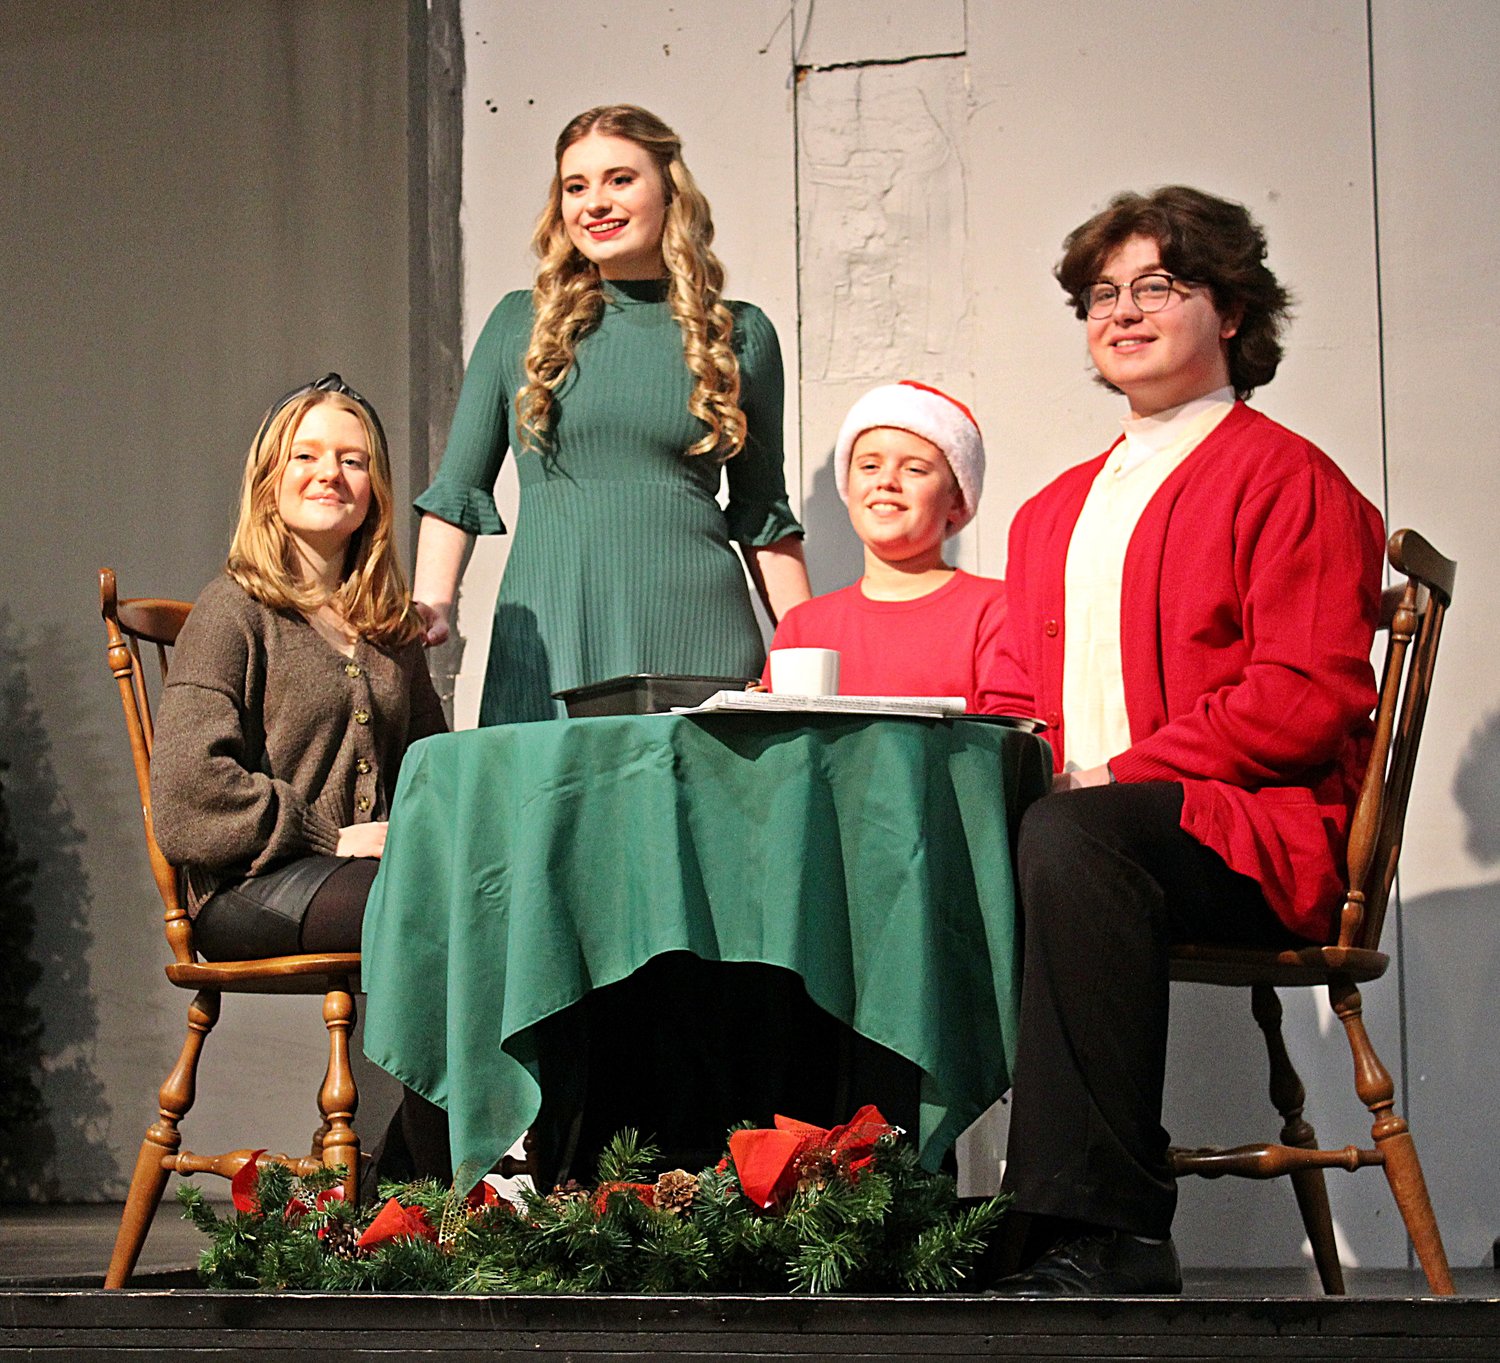 Lucy Ledford, Katy Mayhan, Thomas Pound and Ellis Nichols portray the members of the Bradley family in the show.